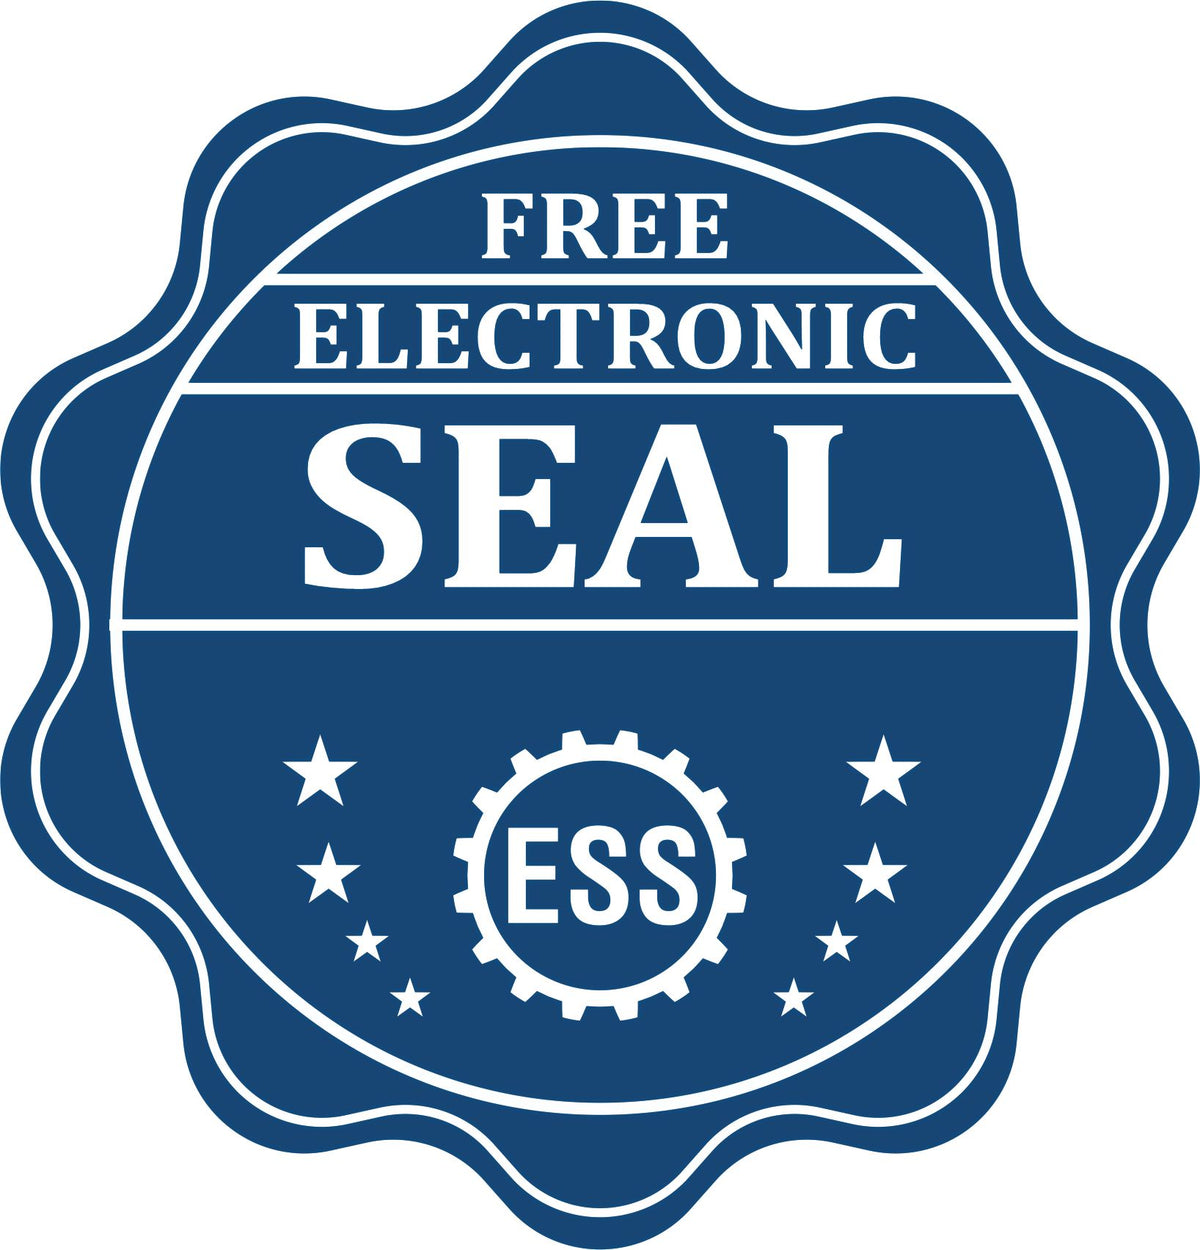 A badge showing a free electronic seal for the Soft Vermont Professional Engineer Seal with stars and the ESS gear on the emblem.